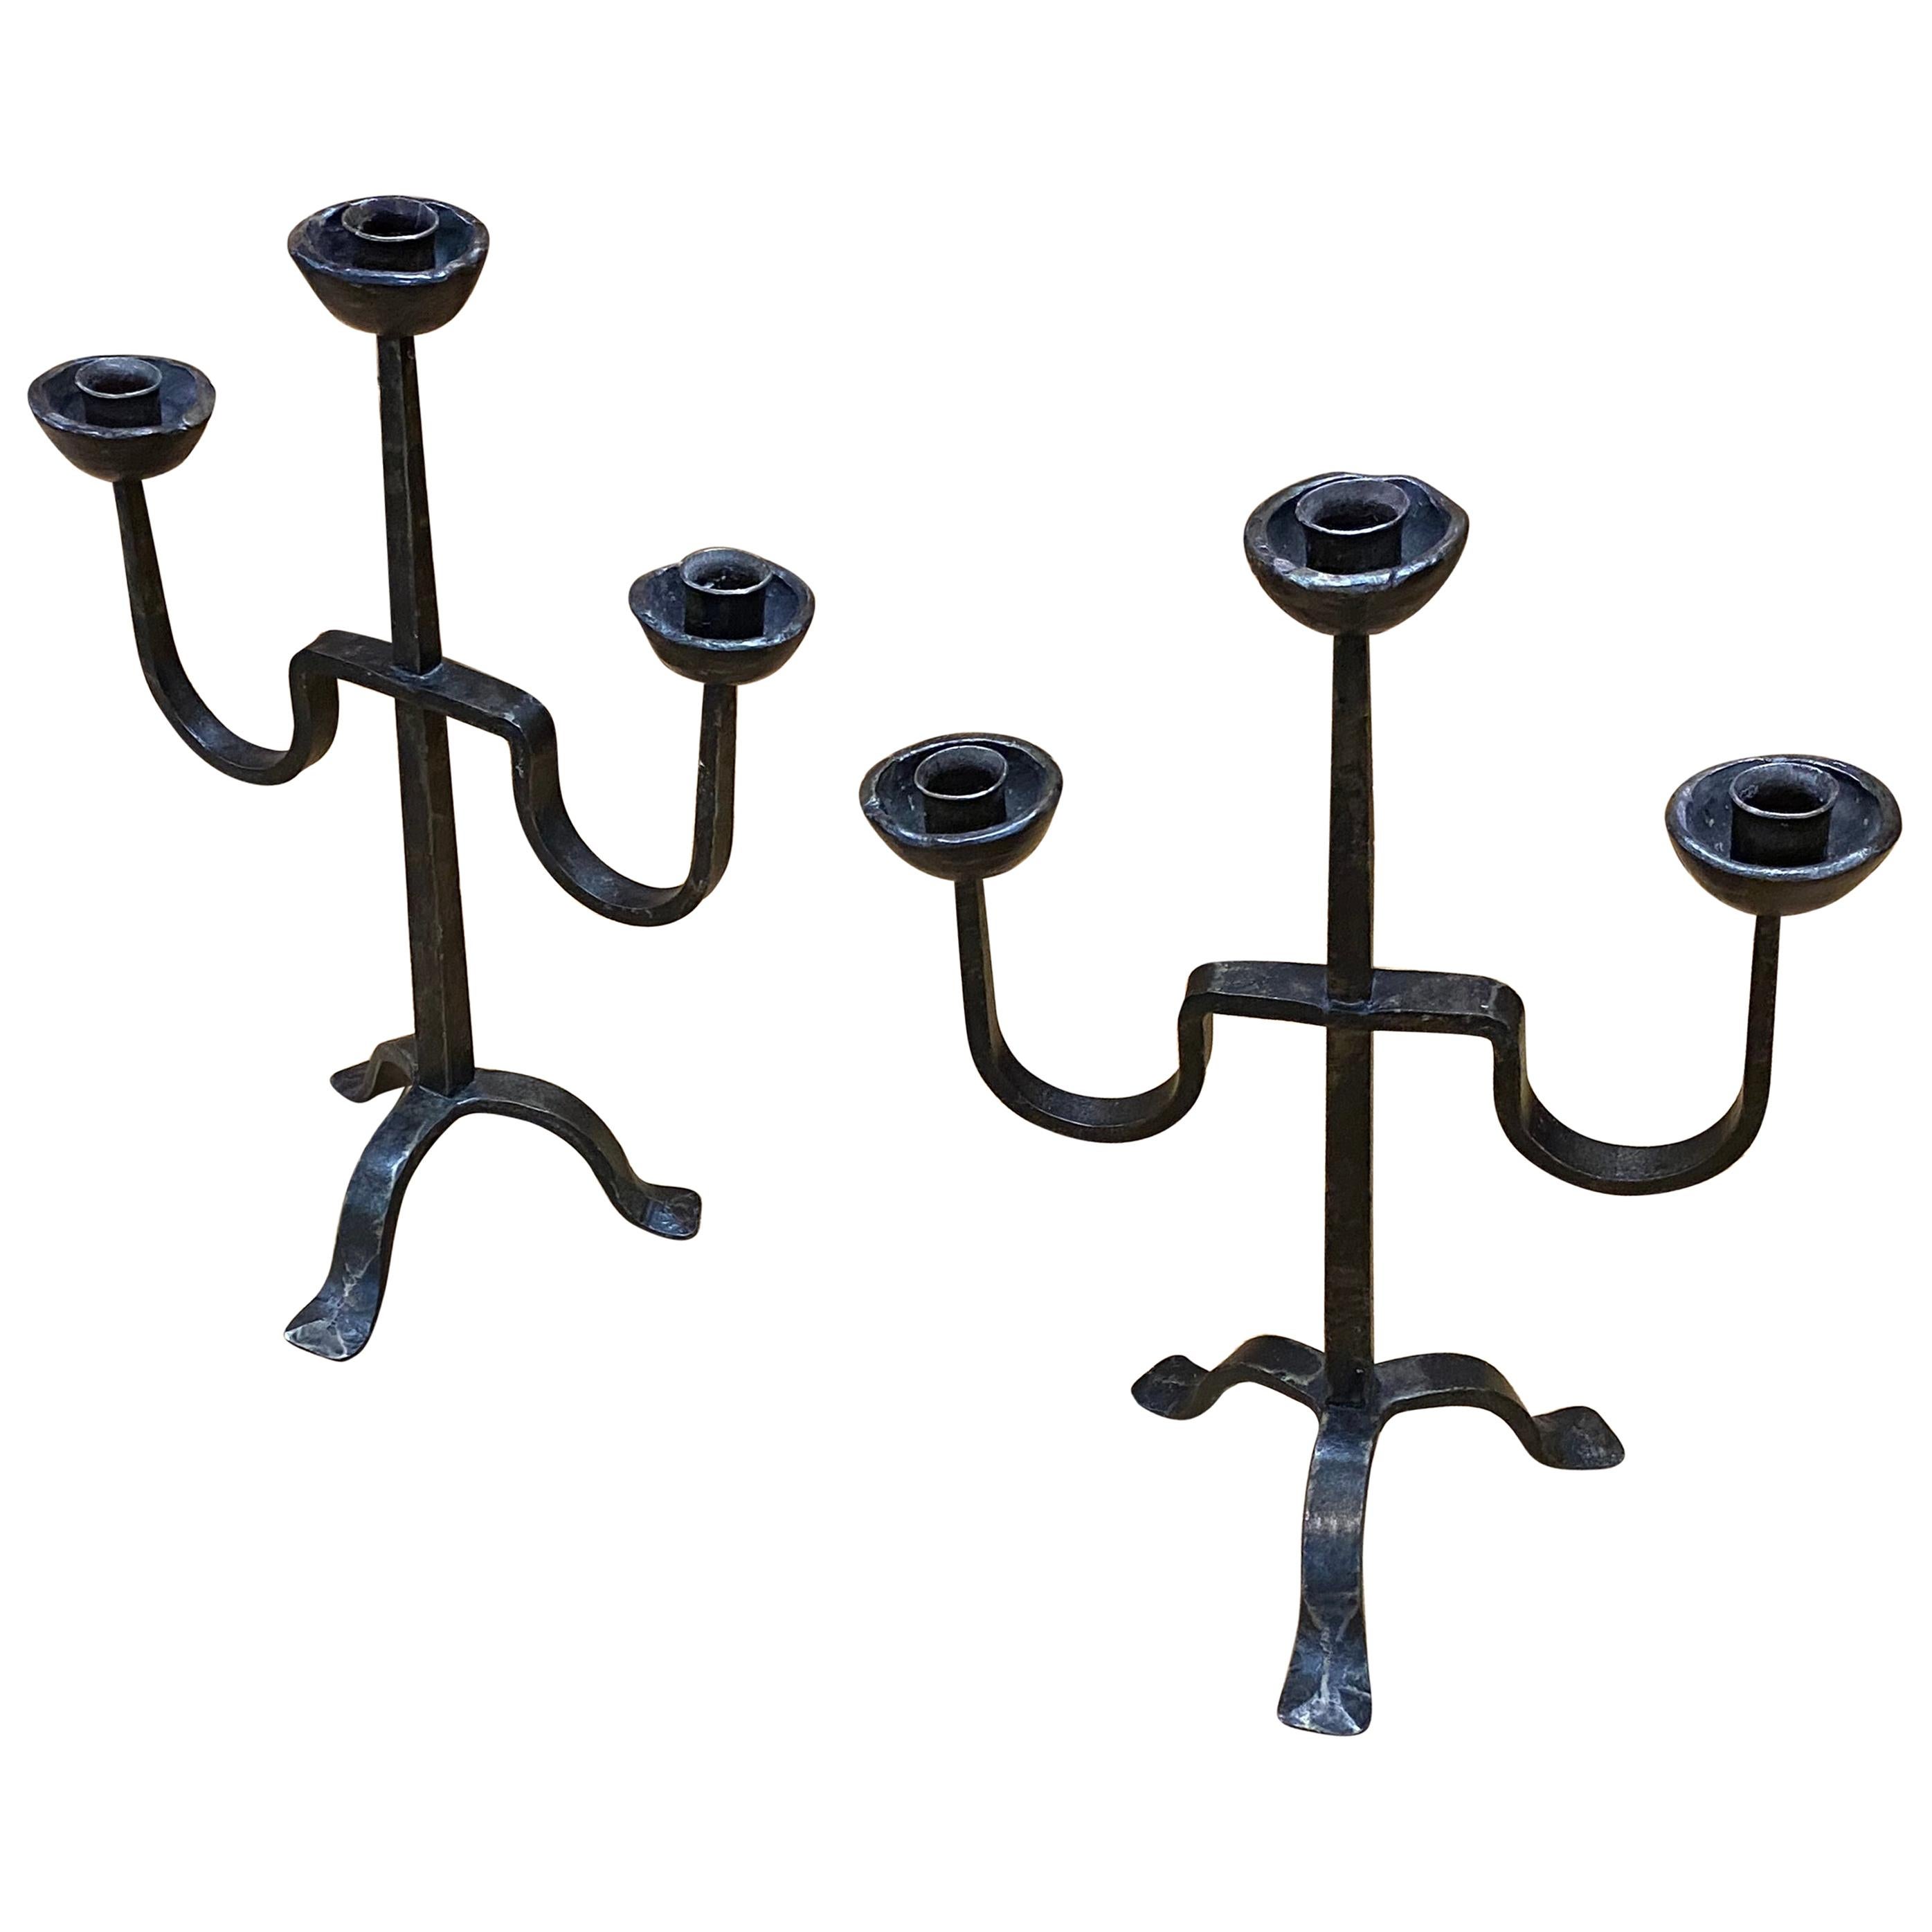 Pair of Wrought Iron Candelabra, in the Style of the Artisans of Marolles